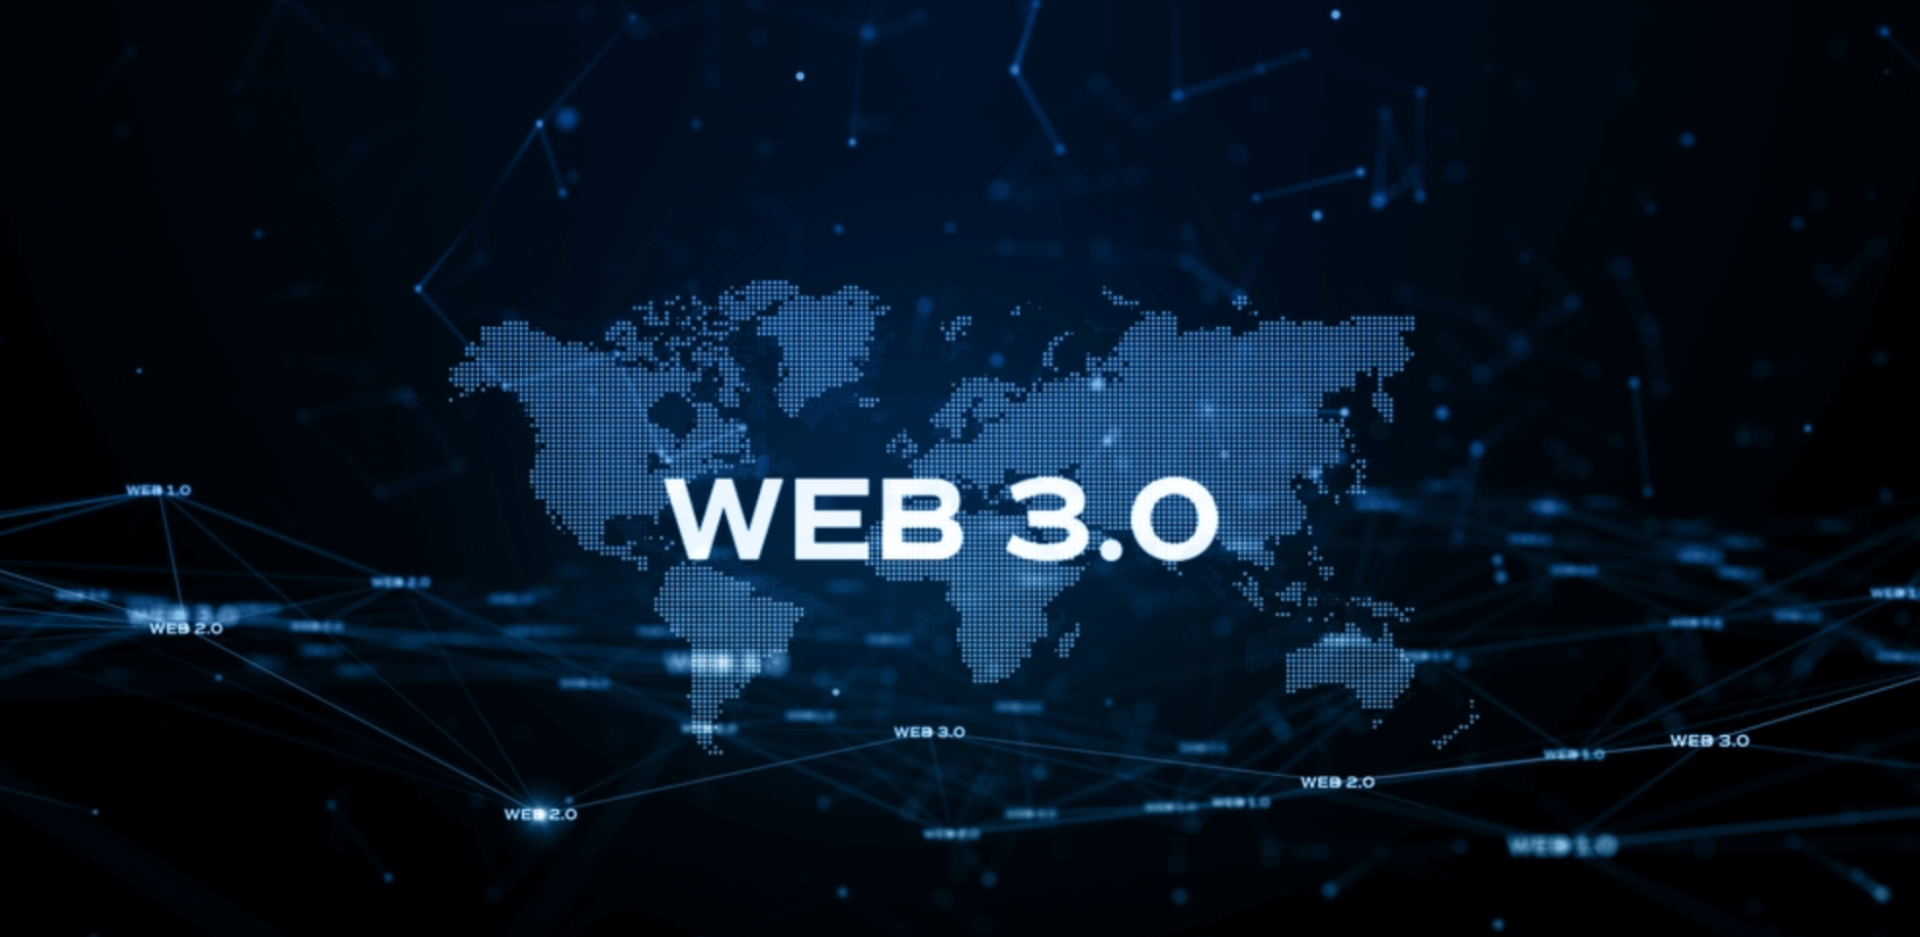 How Web 3.0 Will Be Different From Web 2.0 for Businesses